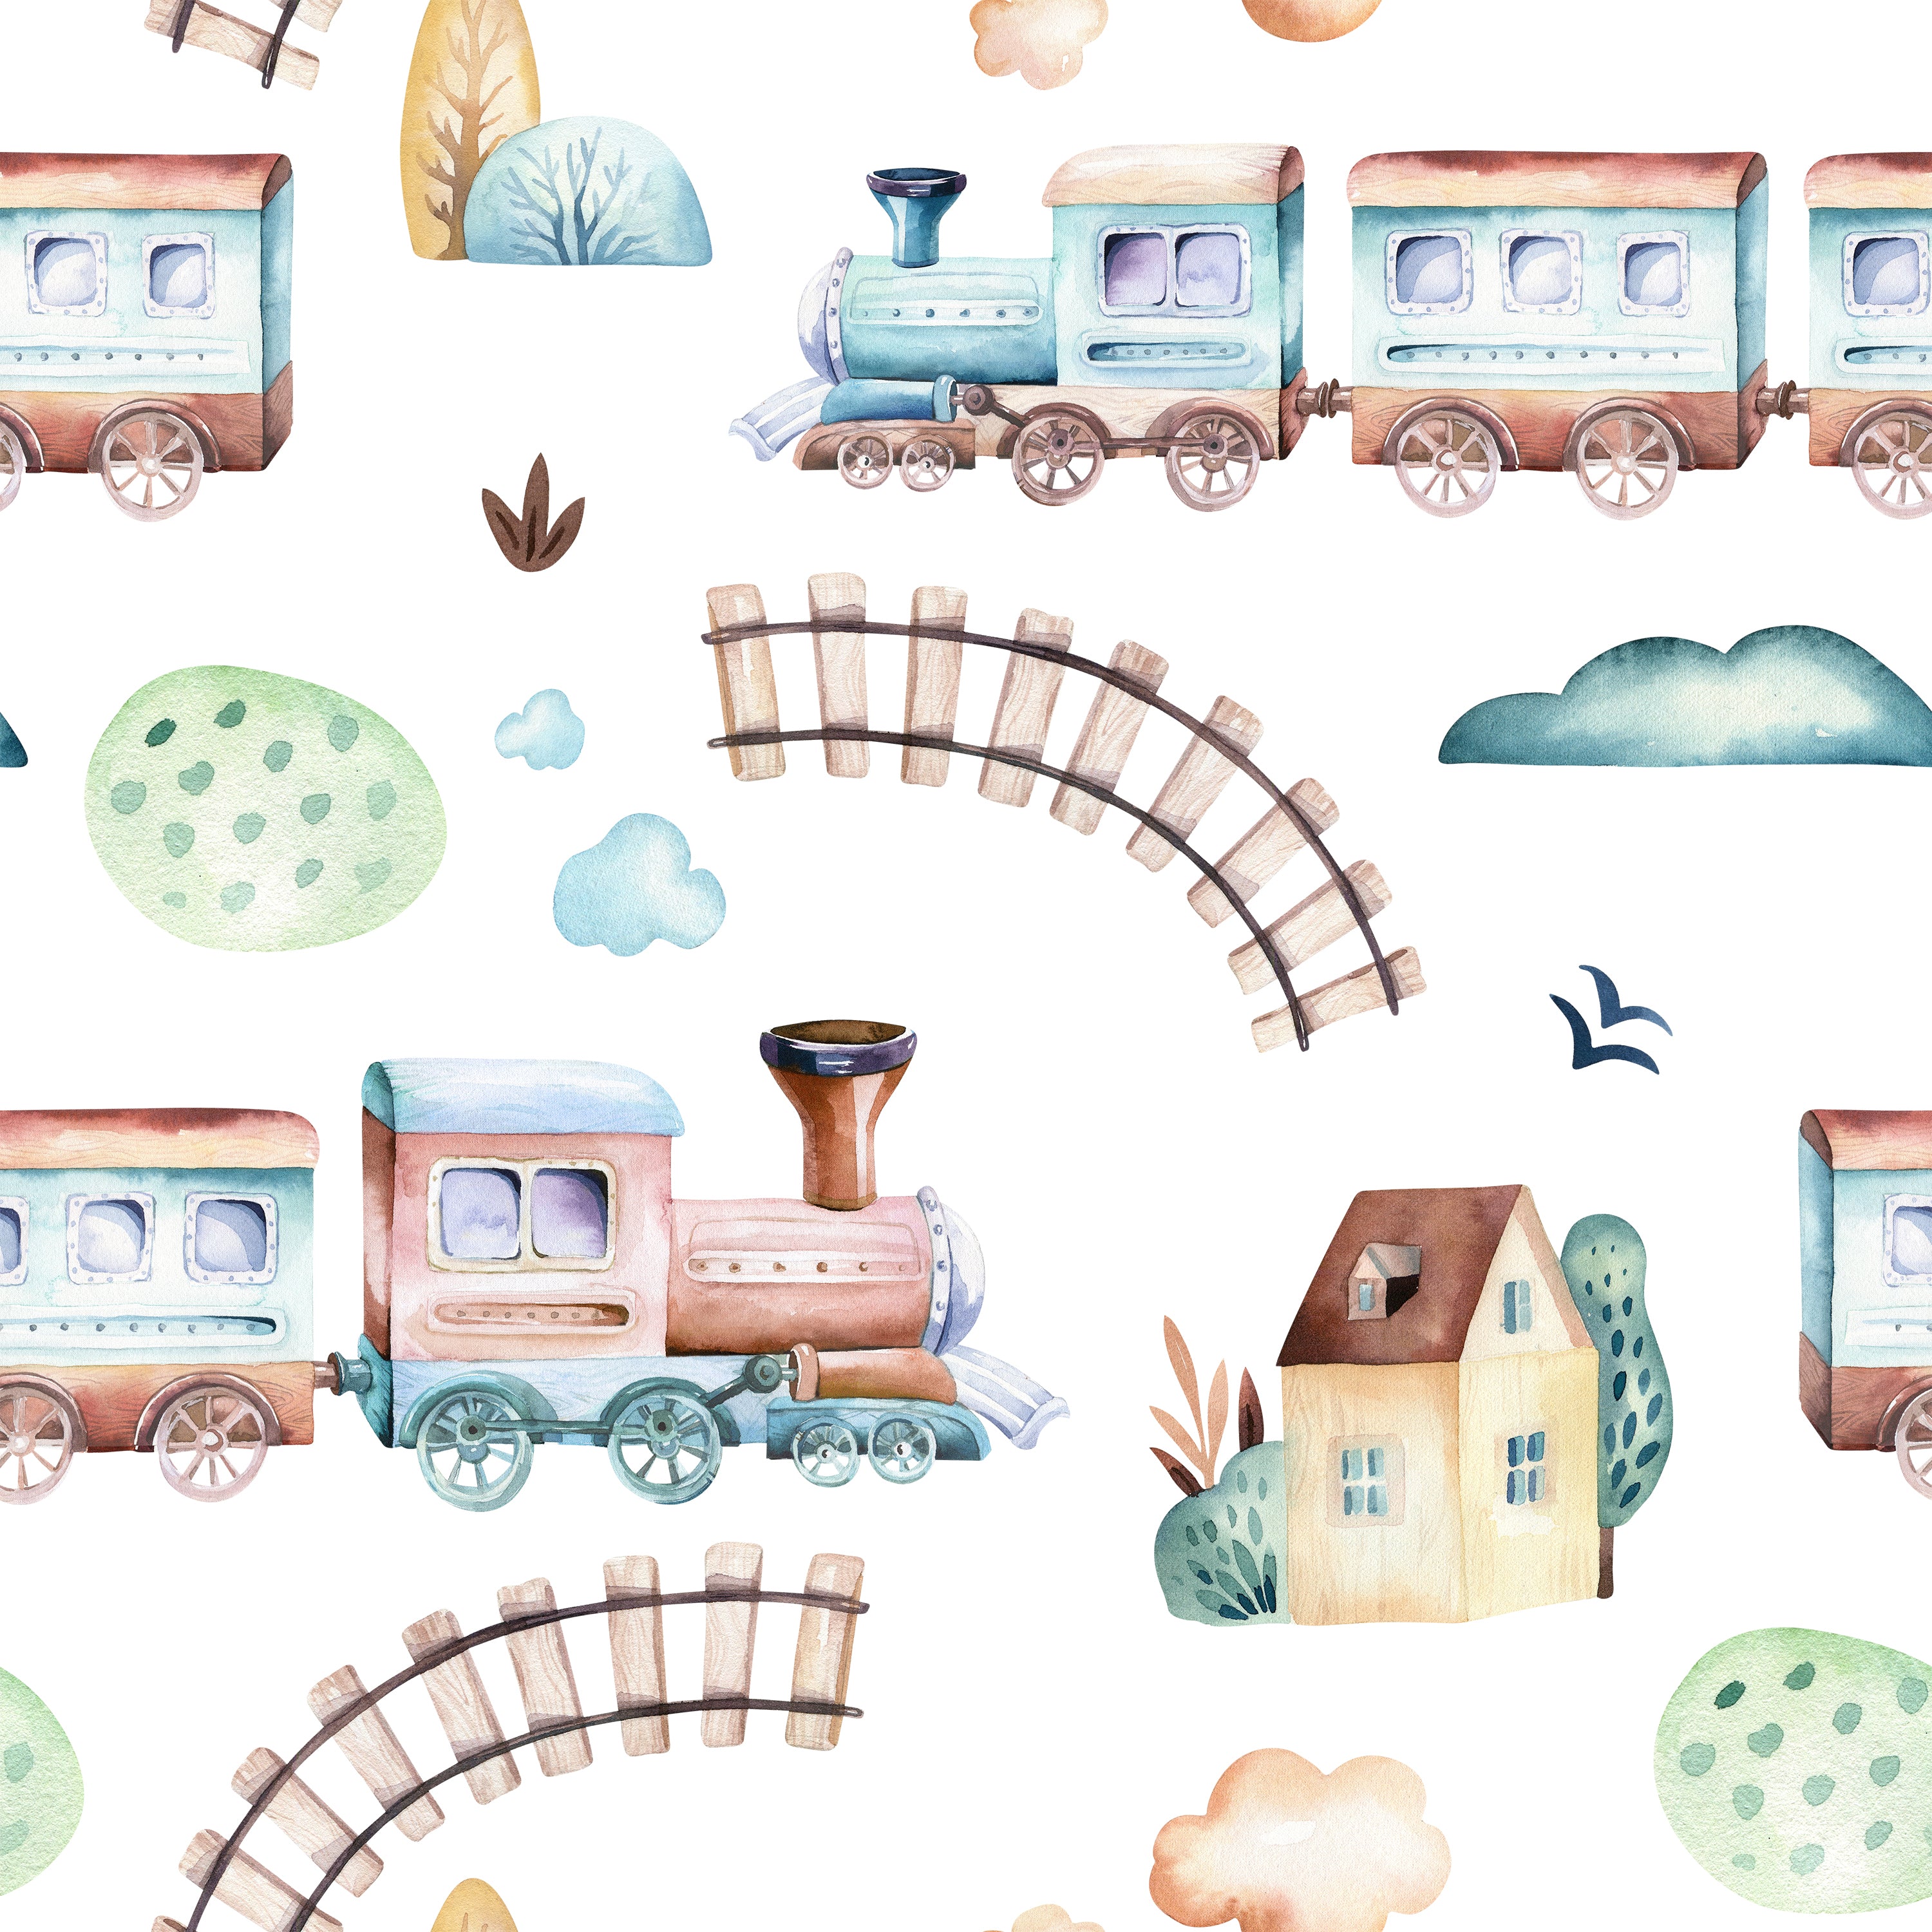 Close-up view of 'Trains and Planes Kids Wallpaper' showcasing a playful and colorful design of vintage trains, airplanes, and houses set among trees and tracks on a pastel background. The pattern includes elements like railroad tracks, fluffy clouds, and small details like leaves and birds, creating a whimsical scene.